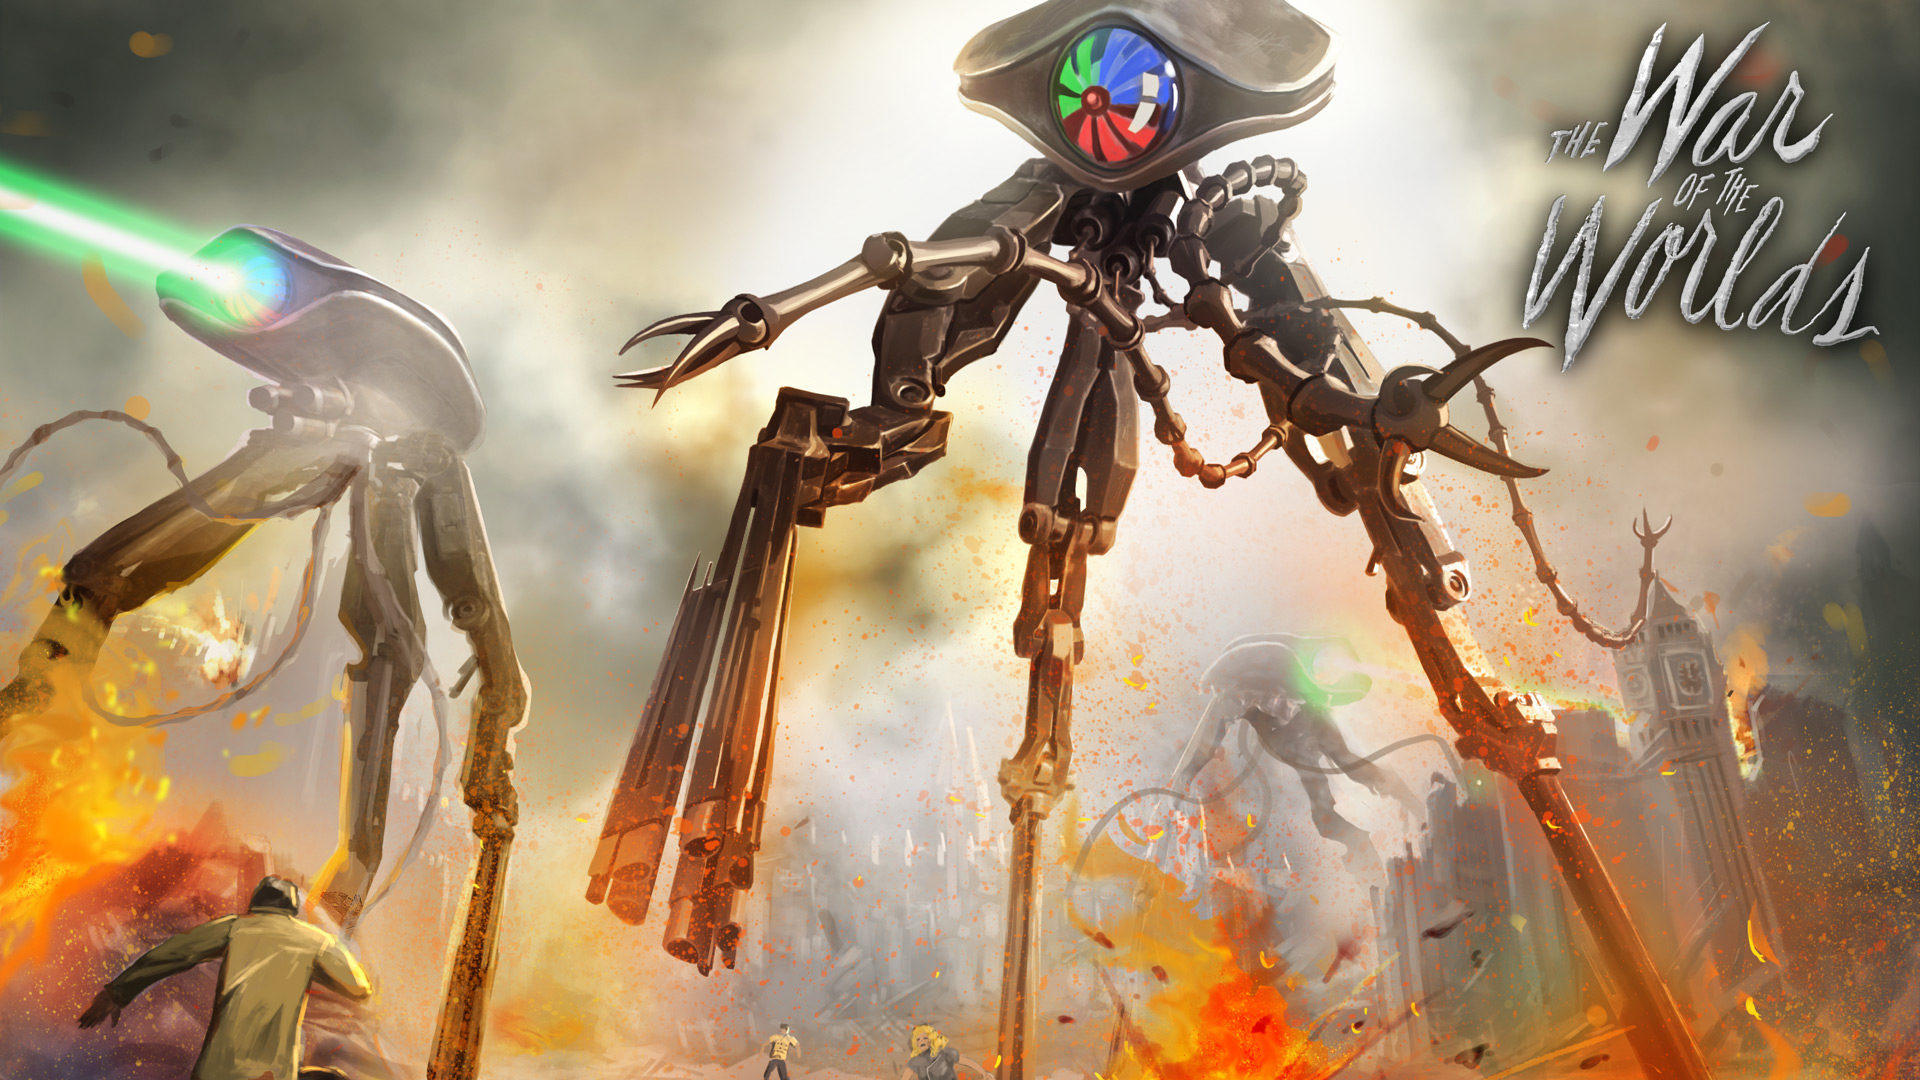 War Of The Worlds Xbox Wallpaper